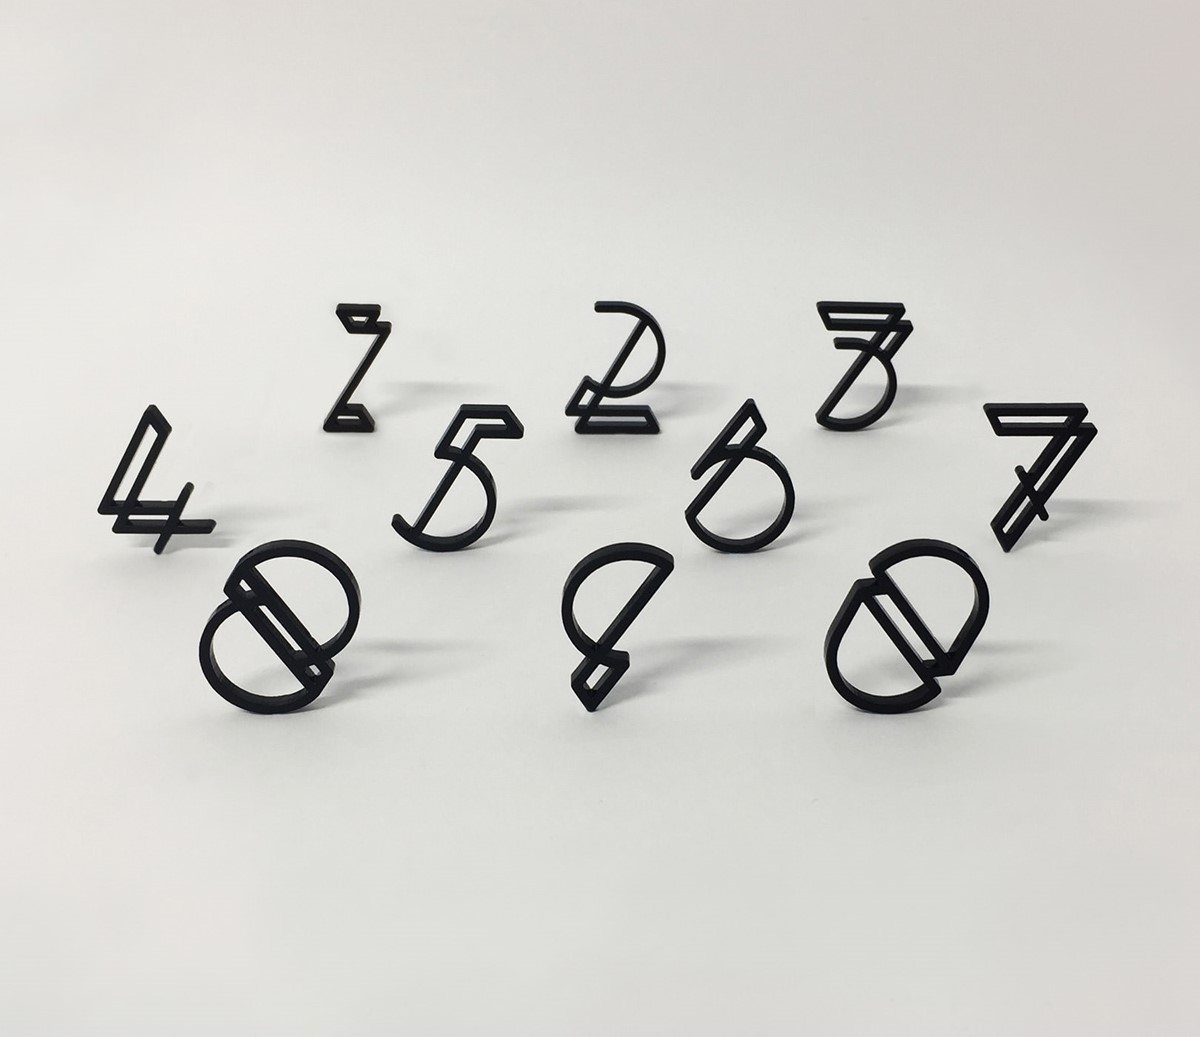 Flex. Fred Aldous. Experimental laser cut numerals standing. Typography design by Superfried.